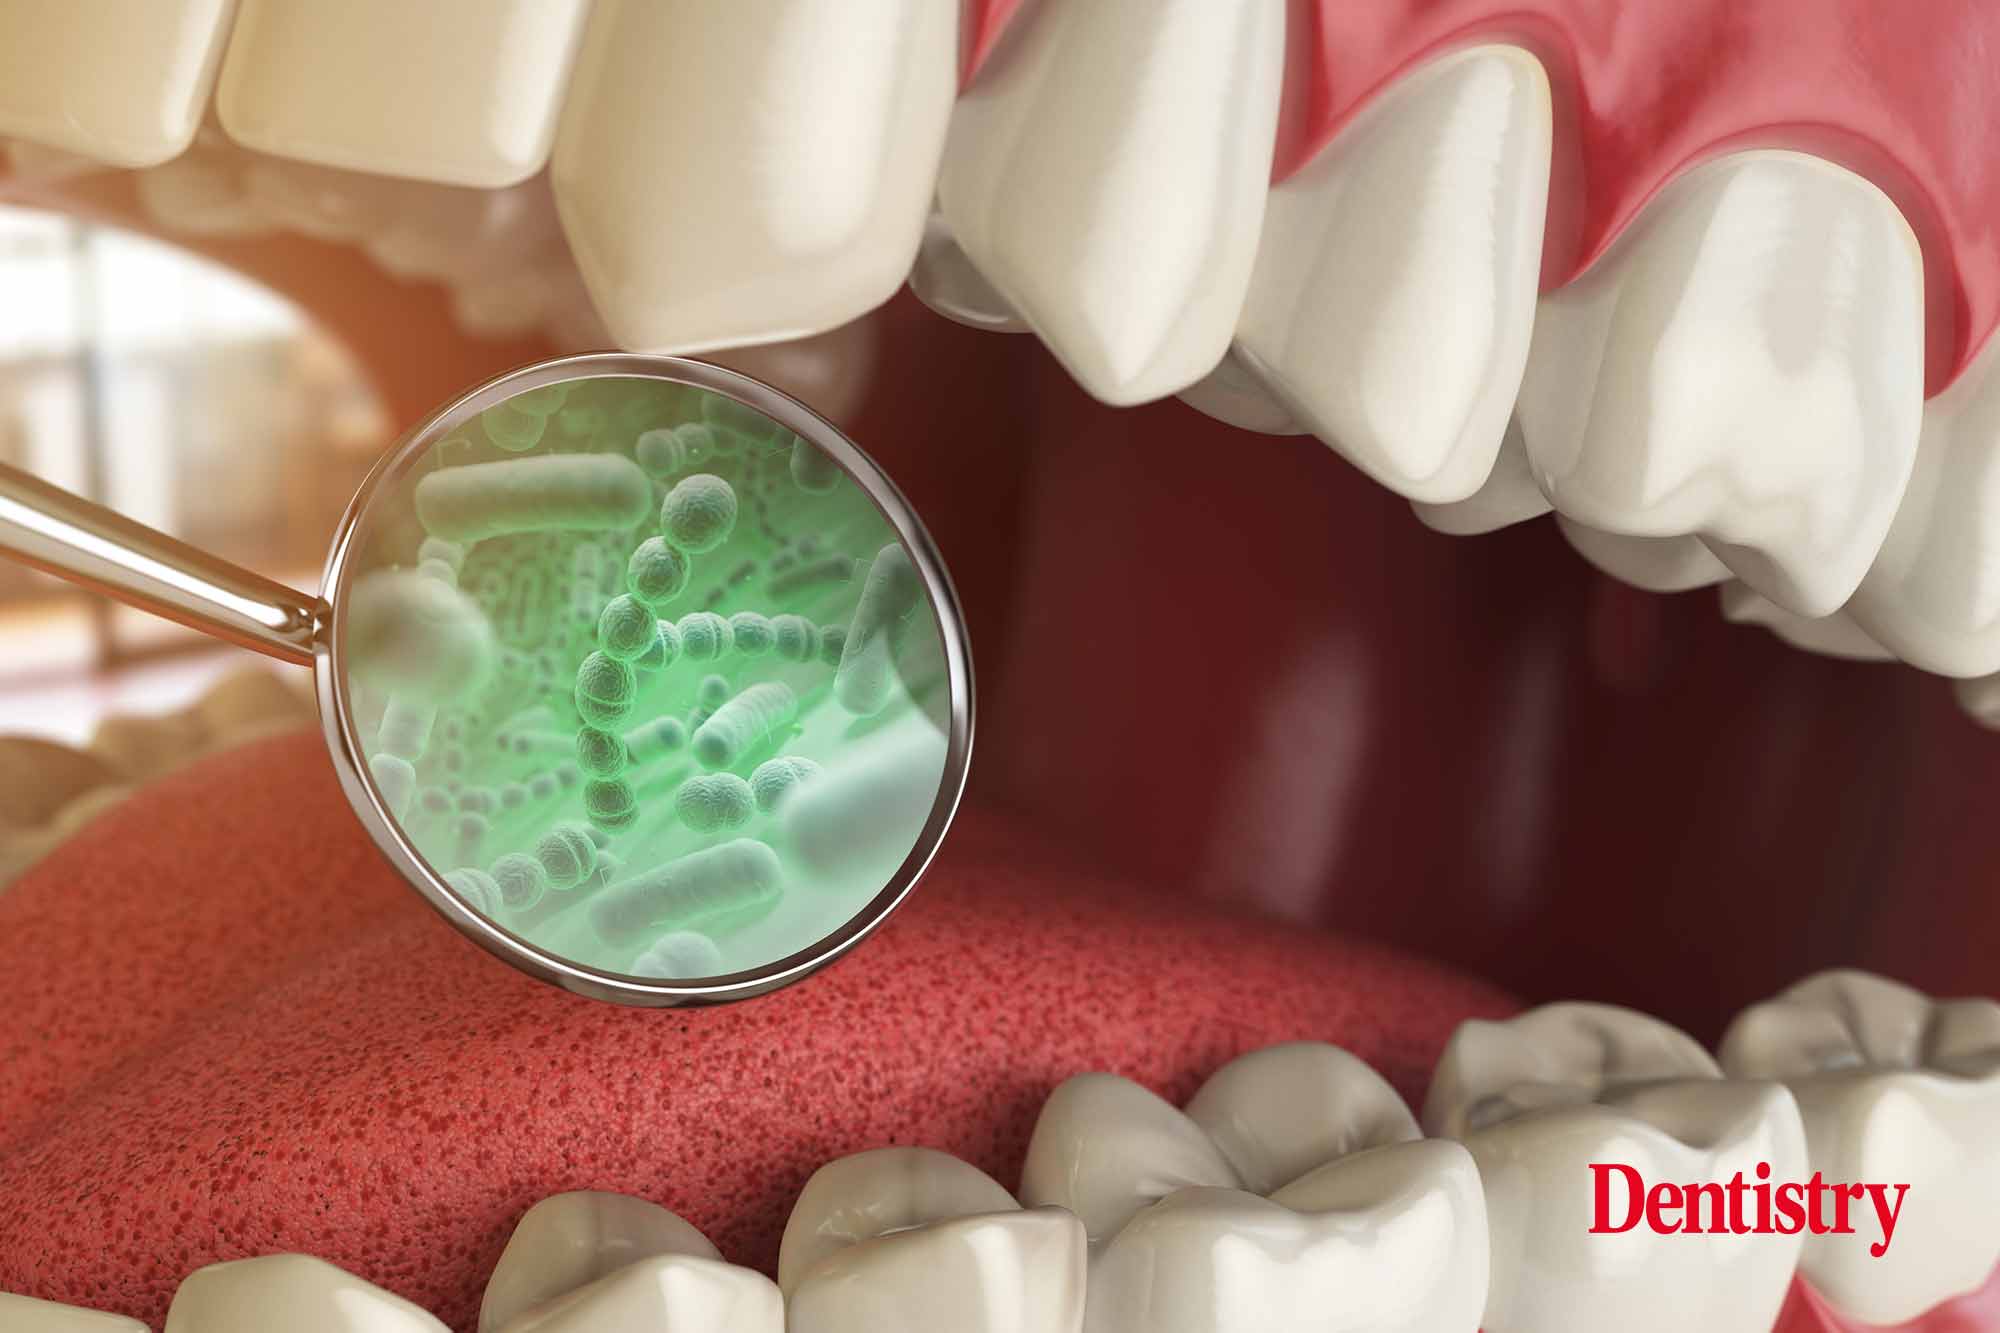 Ahead of the Guided Biofilm Therapy Summit in London this September, speaker Victoria Sampson shares her insight into the oral microbiome and how understanding it fully can help to support patients in their oral health efforts between appointments.